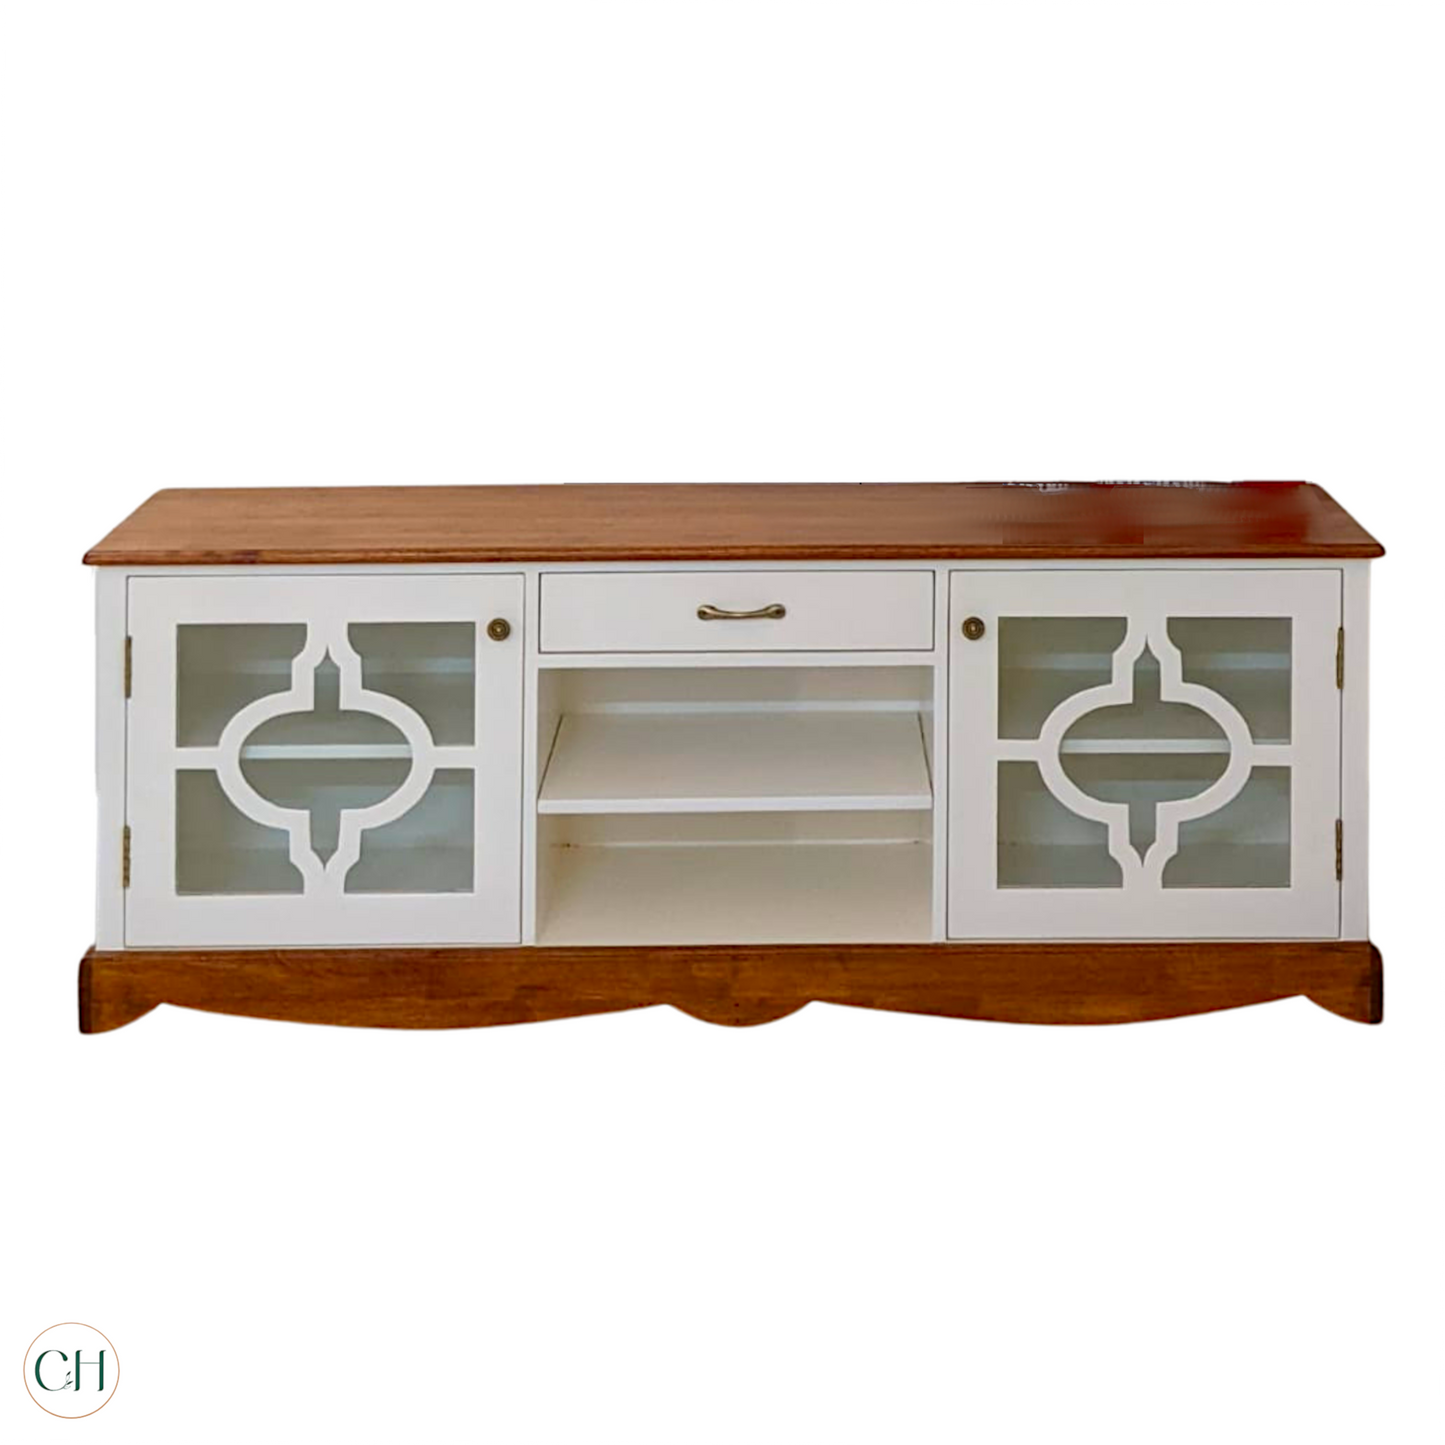 CustHum Venetia - Wooden TV Stand in white and wood tone, two doors on the side with onate design on glass panels, drawer and two open shelves in the middle (front view)